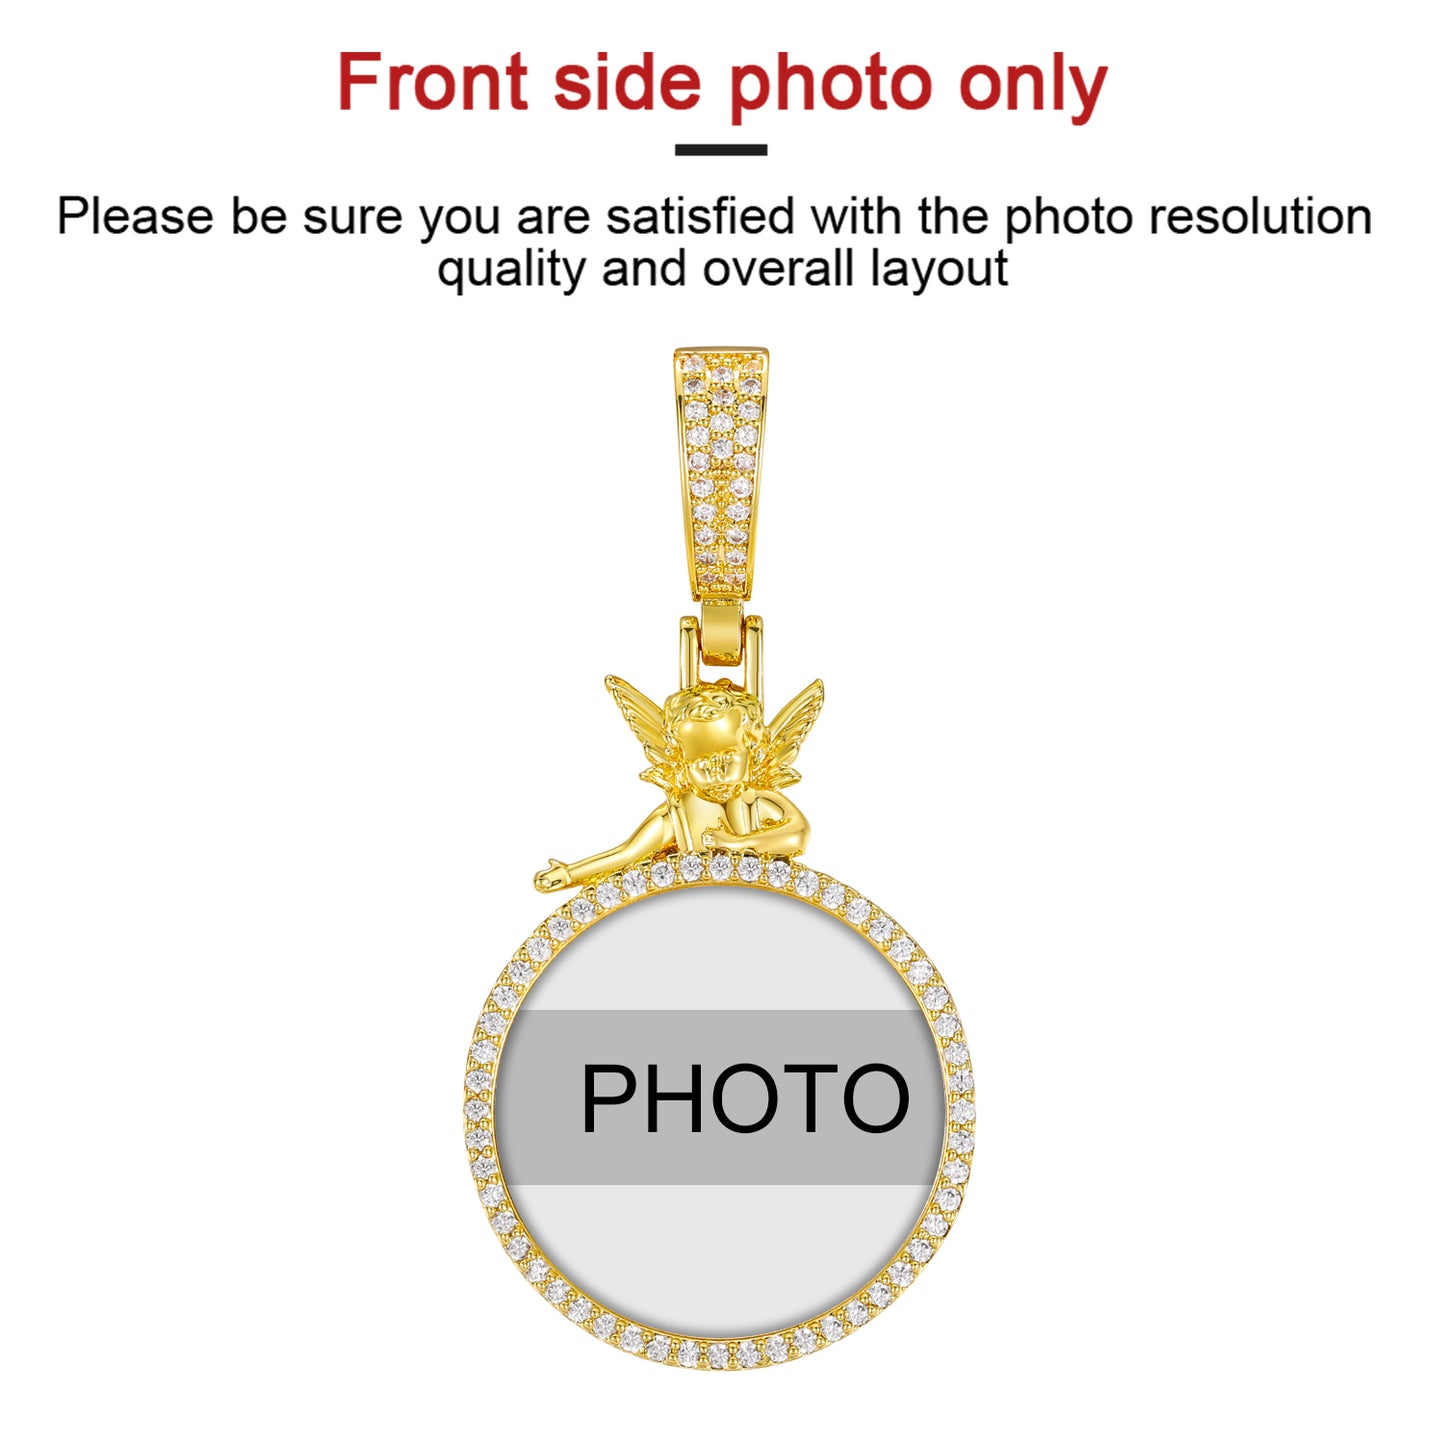 Watch Over Me Photo Necklace